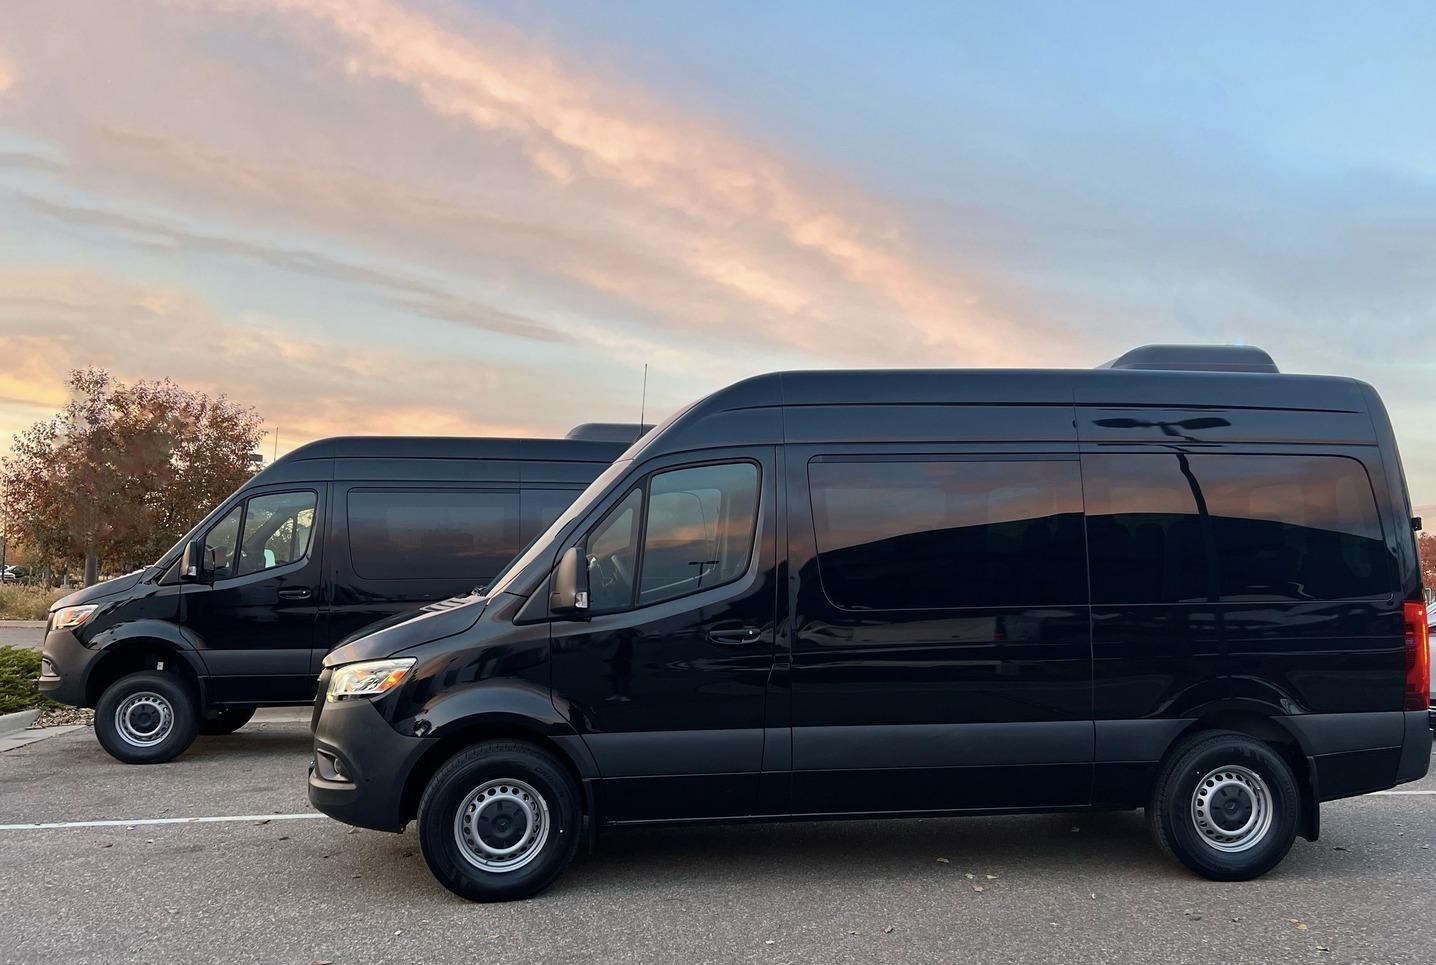 Sprinter Van Transfers from Denver Airport to Vail